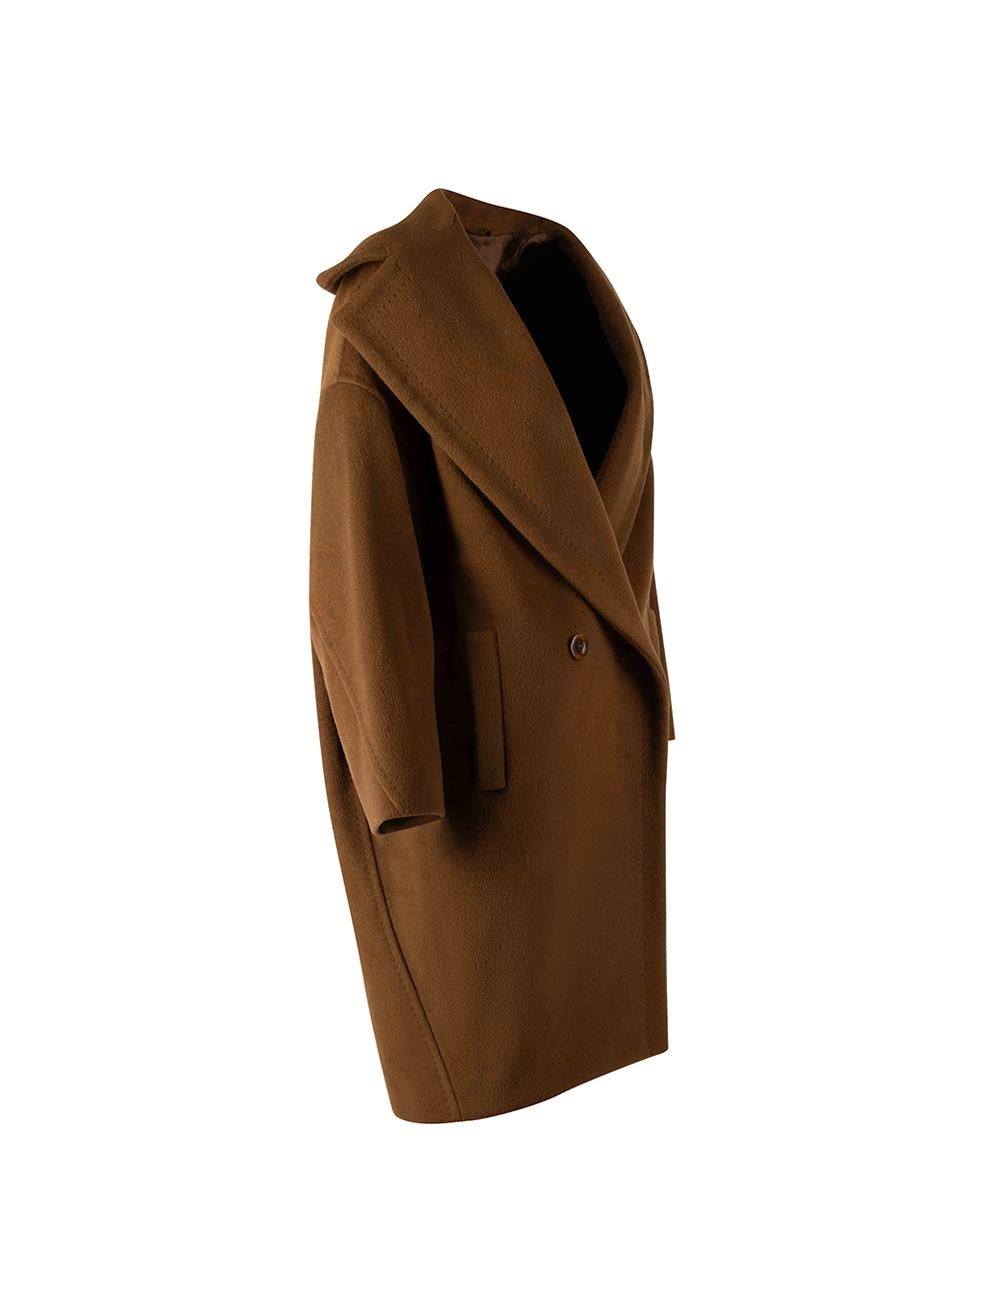 CONDITION is Very good. Hardly any visible wear to coat is evident on this used Max Mara designer resale item. 



Details


Brown

Wool

Long coat

Oversized fit

Double breasted

2x Front side pockets





Made in Italy



Composition

90% Wool